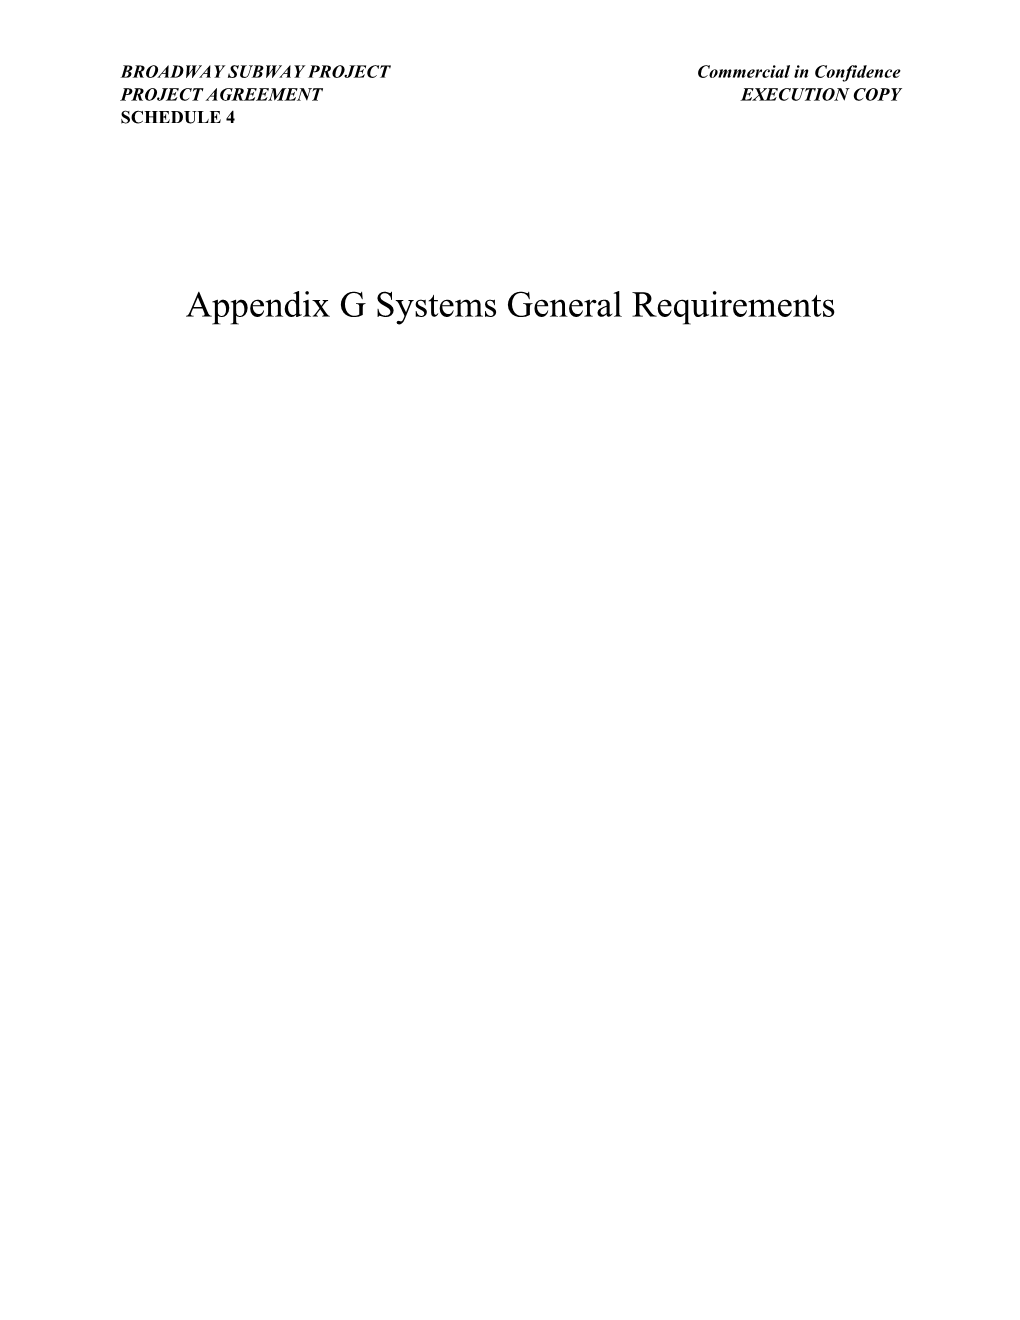 Appendix G Systems General Requirements